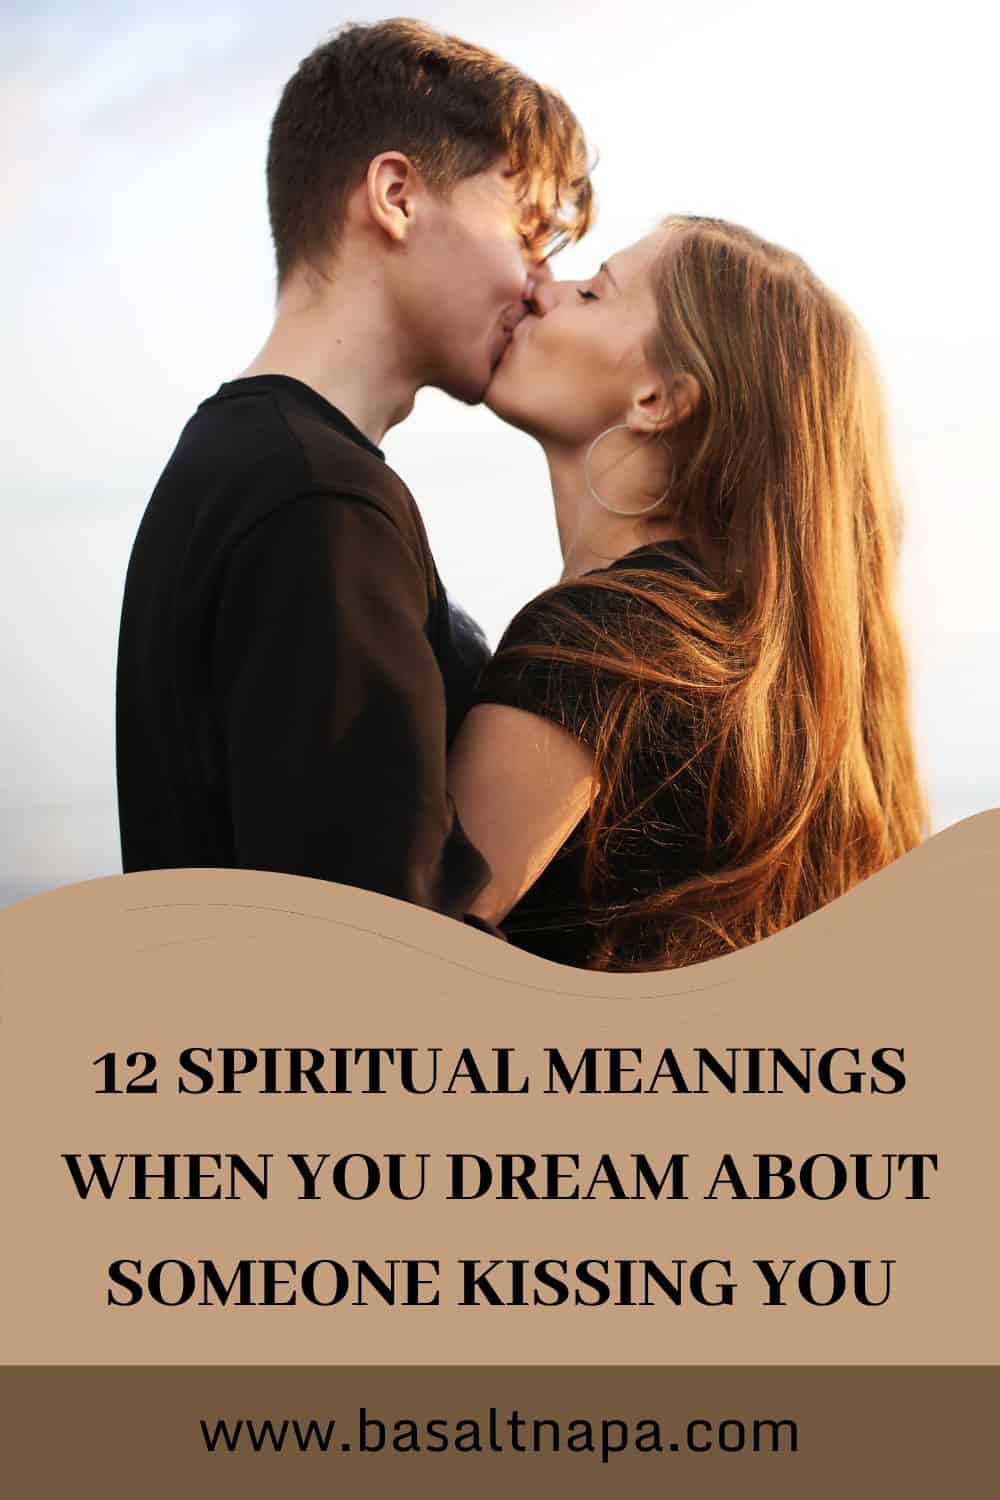 What does it mean when you dream about someone kissing you